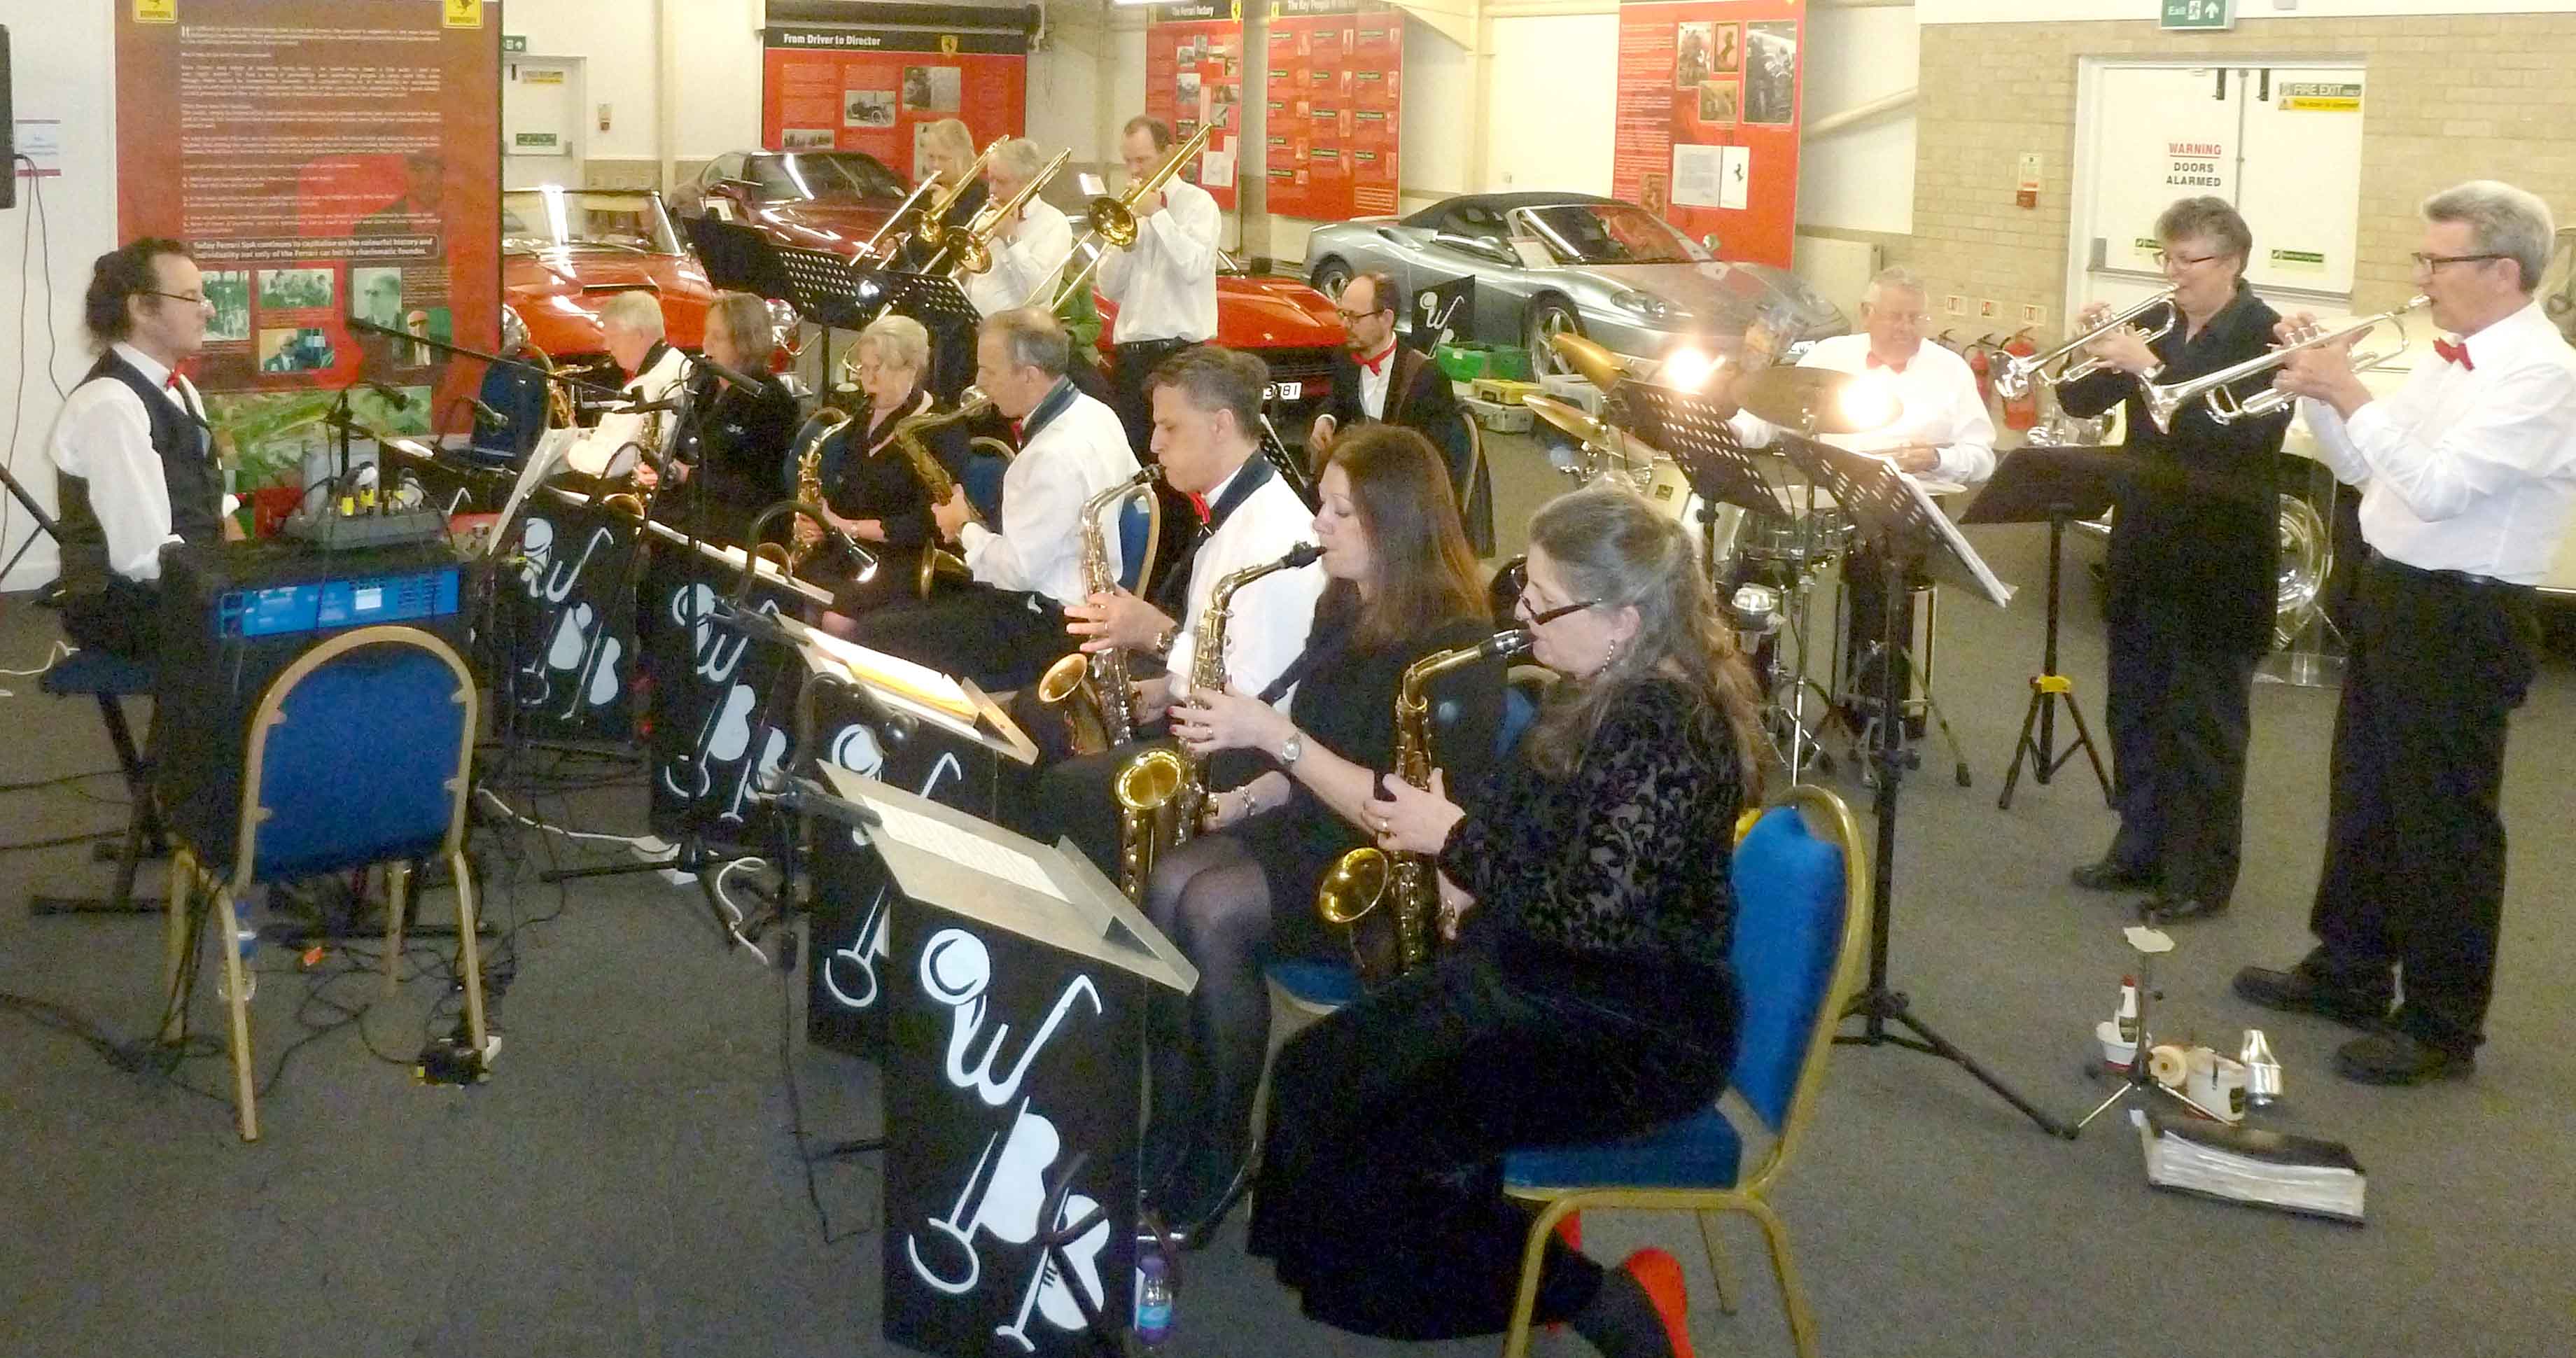 Band in Concert at Taunton with Vocalist Kelly & Musical Director Alan Brown